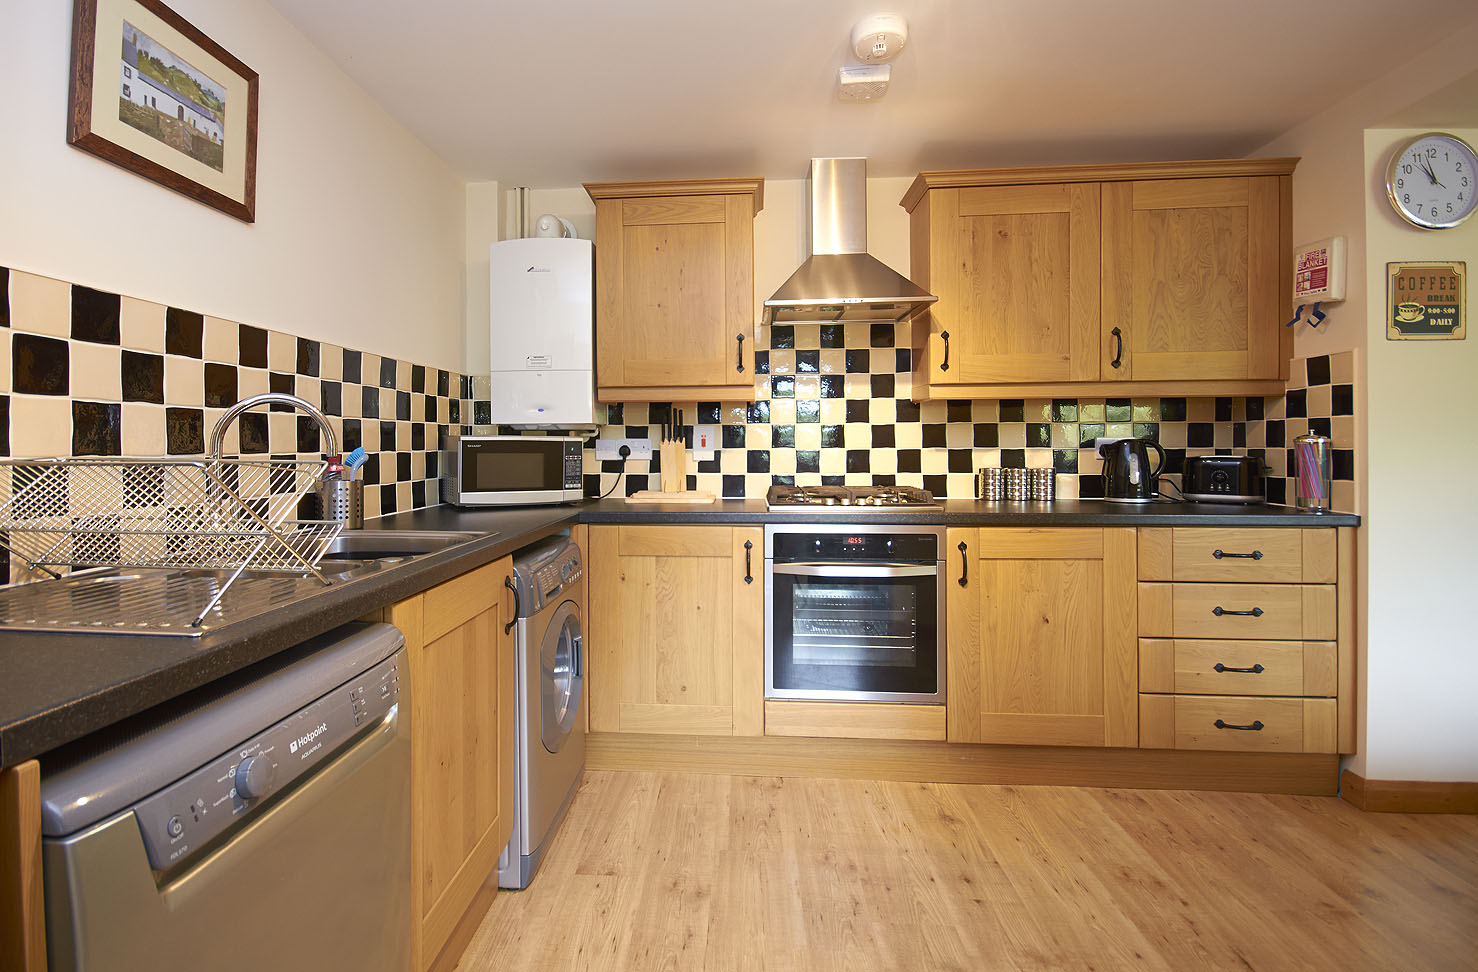 New Forest self catering cottages | Shepherds Spring Cottages kitchen